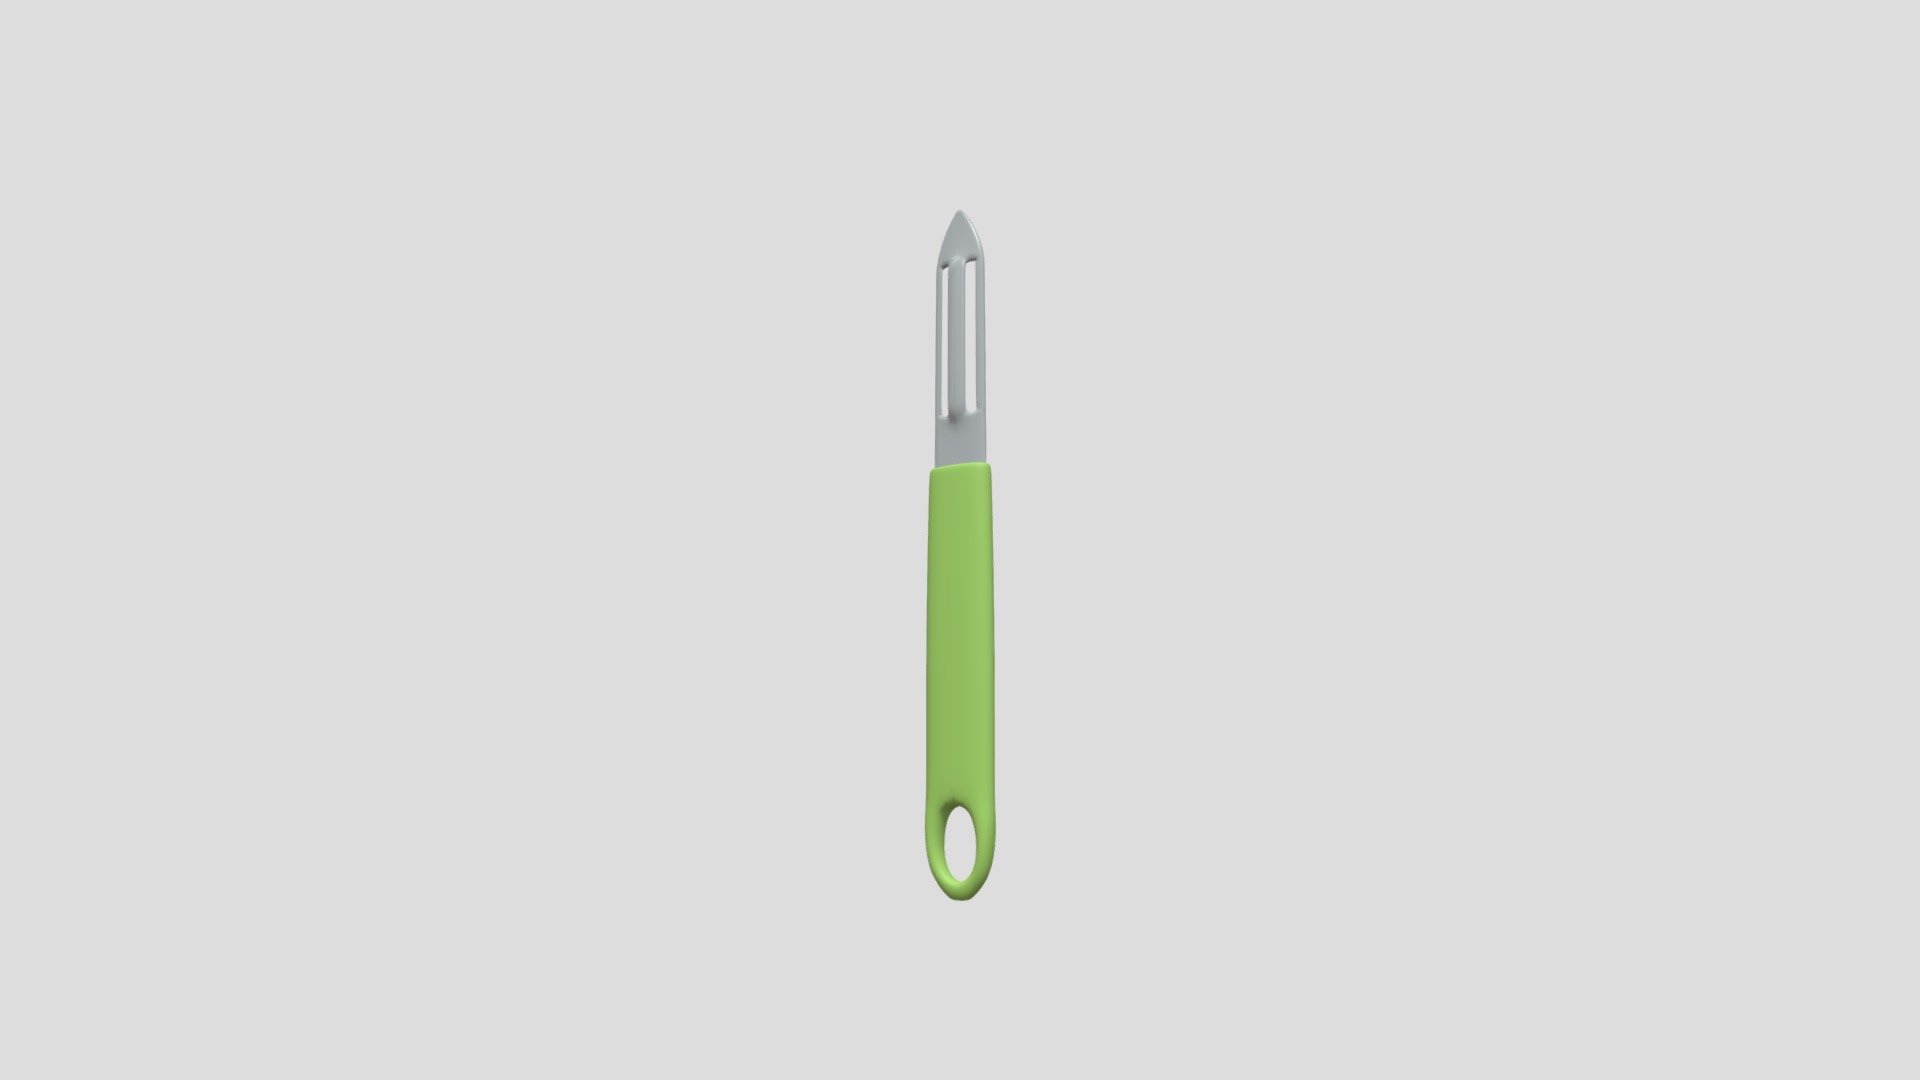 Textures: 1024 x 1024, Colors on texture: green, grey.

Materials: 2 - Metal, plastic.

Smooth shaded.

Mirrored.

Subdivision Level: 1

Origin located on handle-center.

Polygons: 5312

Vertices: 2654

Formats: Fbx, Obj, Stl, Dae.

I hope you enjoy the model! - Potato Peeler - Buy Royalty Free 3D model by Ed+ (@EDplus) 3d model